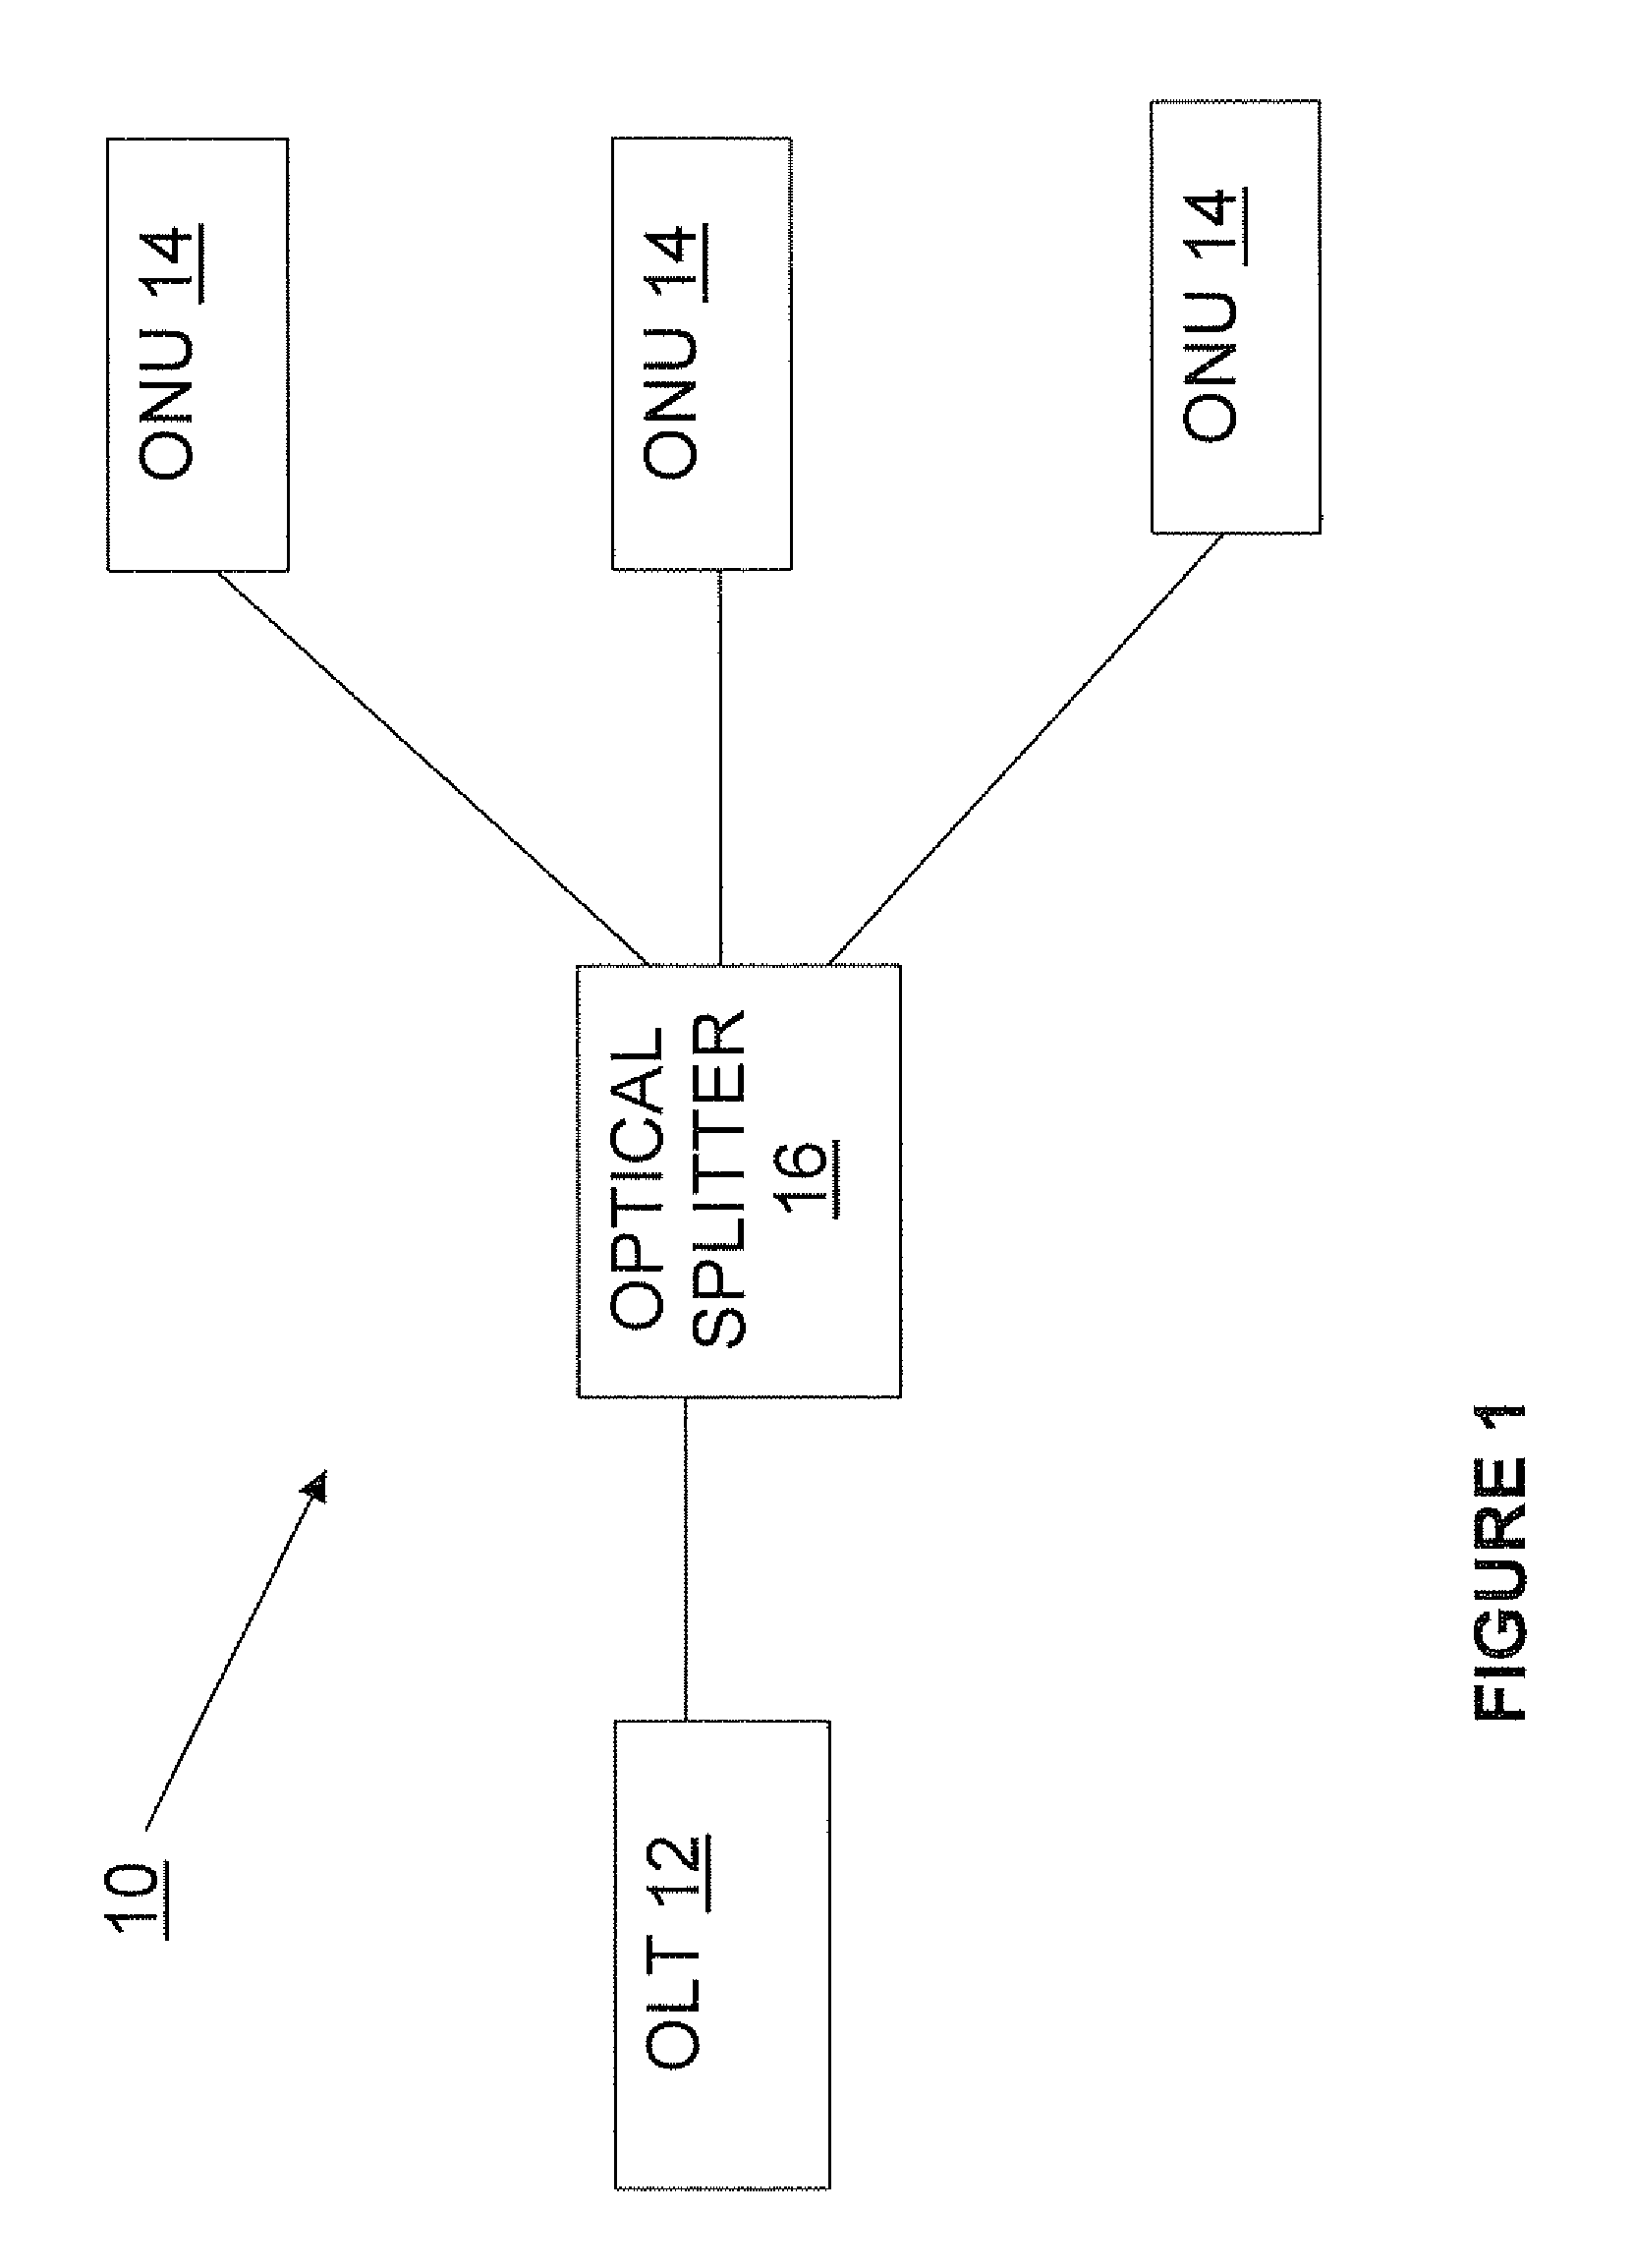 Dynamic bandwidth allocation in a passive optical network in which different optical network units transmit at different rates